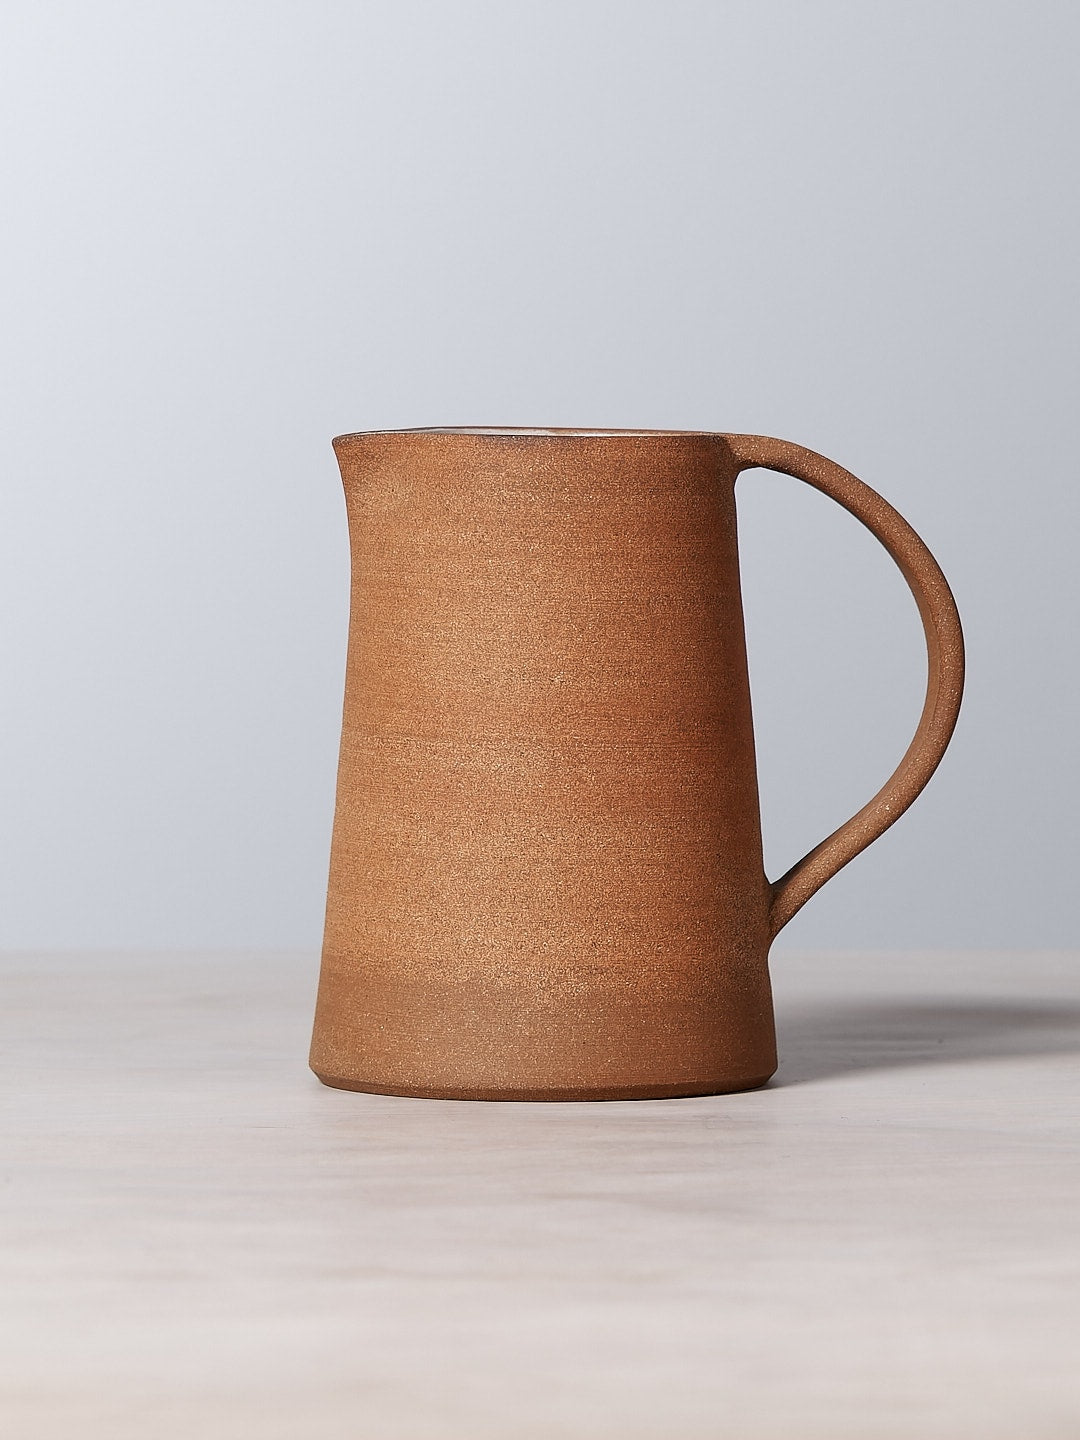 A Nicola Shuttleworth Textured jug sitting on top of a table.